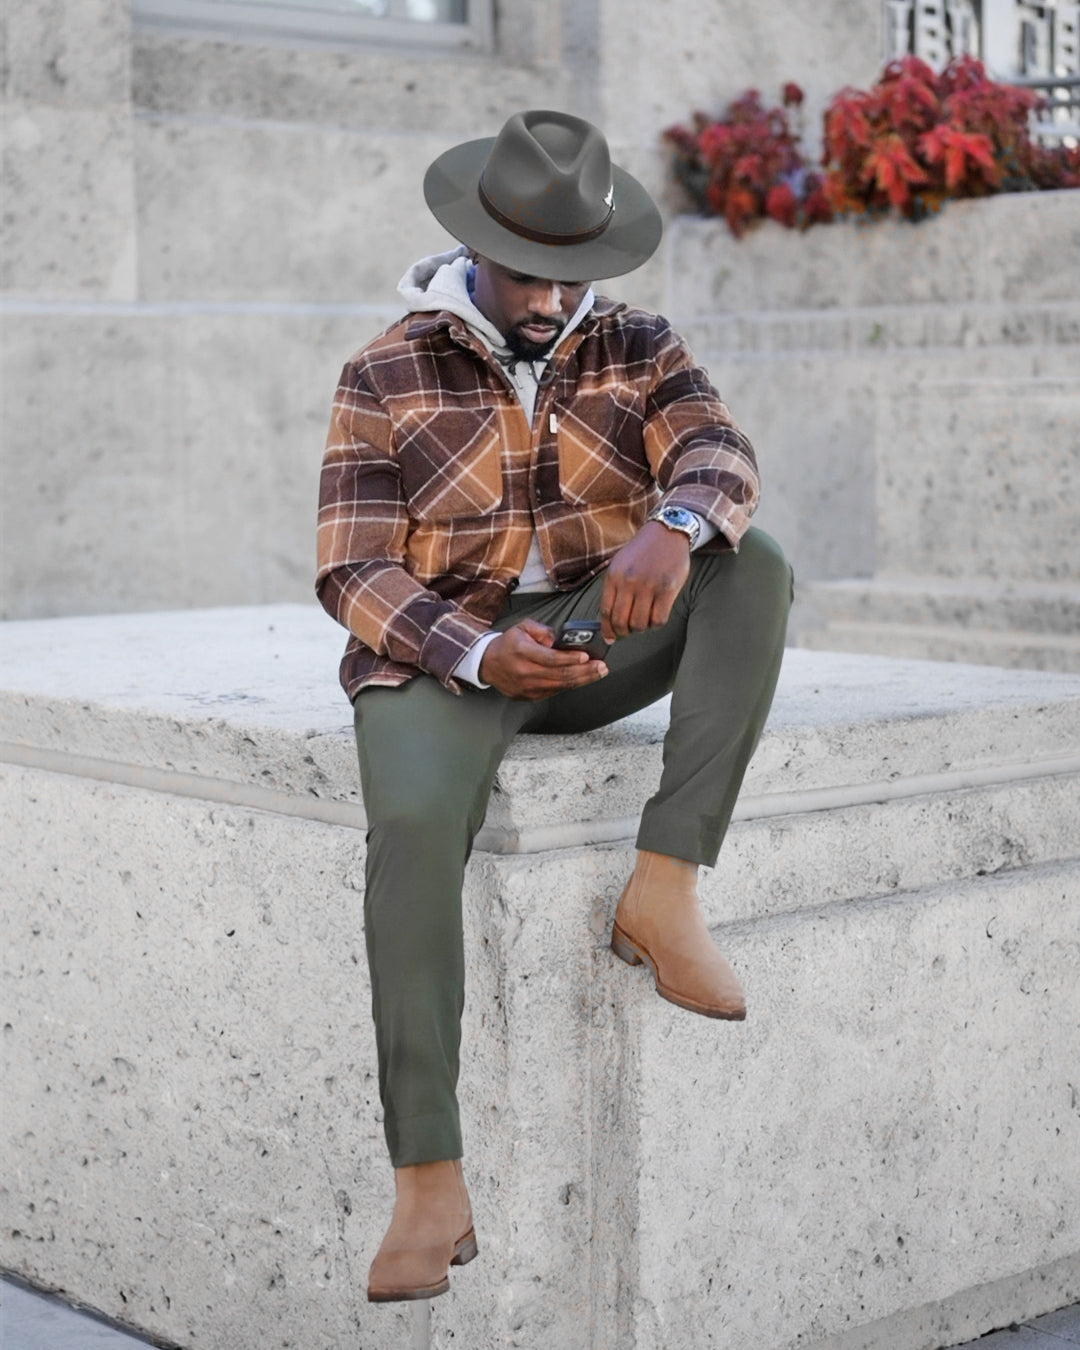 Hats – Southern Gents